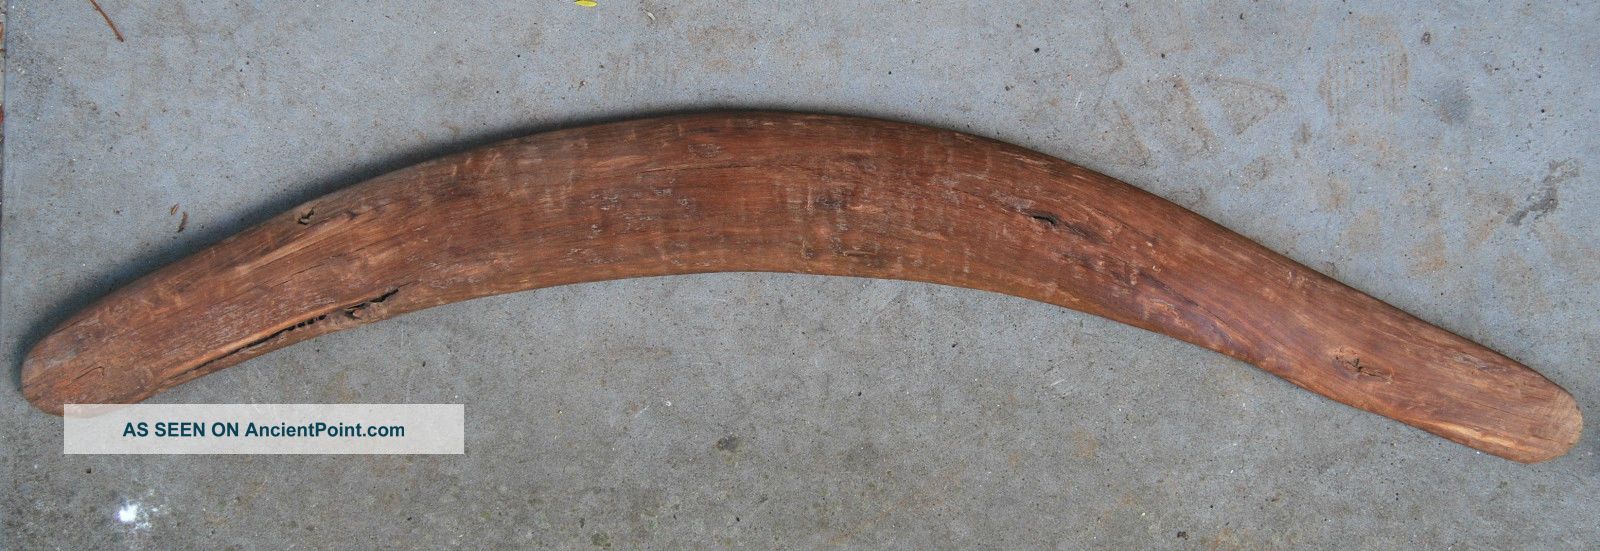 Old Aboriginal Boomerang - Surface Find - Found In The Desert In The 1950 ' S Pacific Islands & Oceania photo